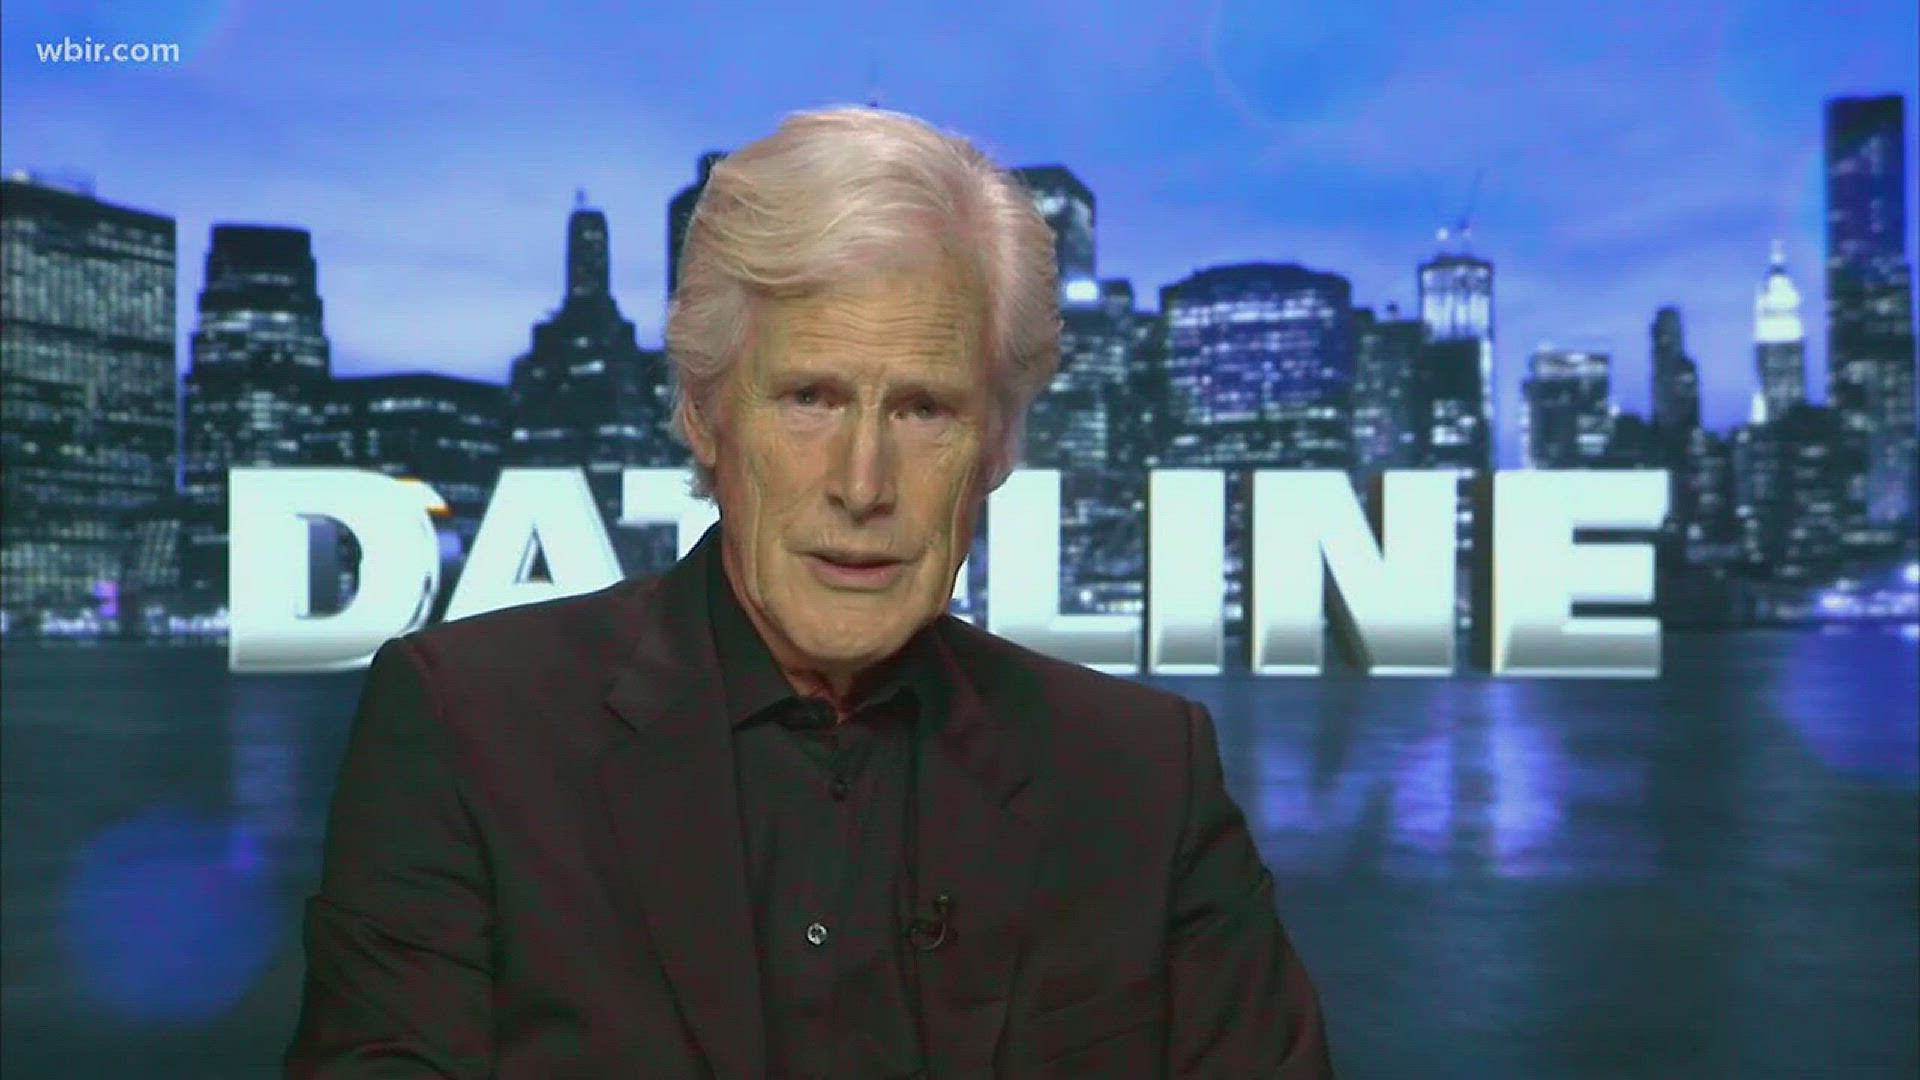 Nov. 17, 2017: Keith Morrison talks with WBIR's Robin Wilhoit about Dateline's episode on the Menendez Brothers.